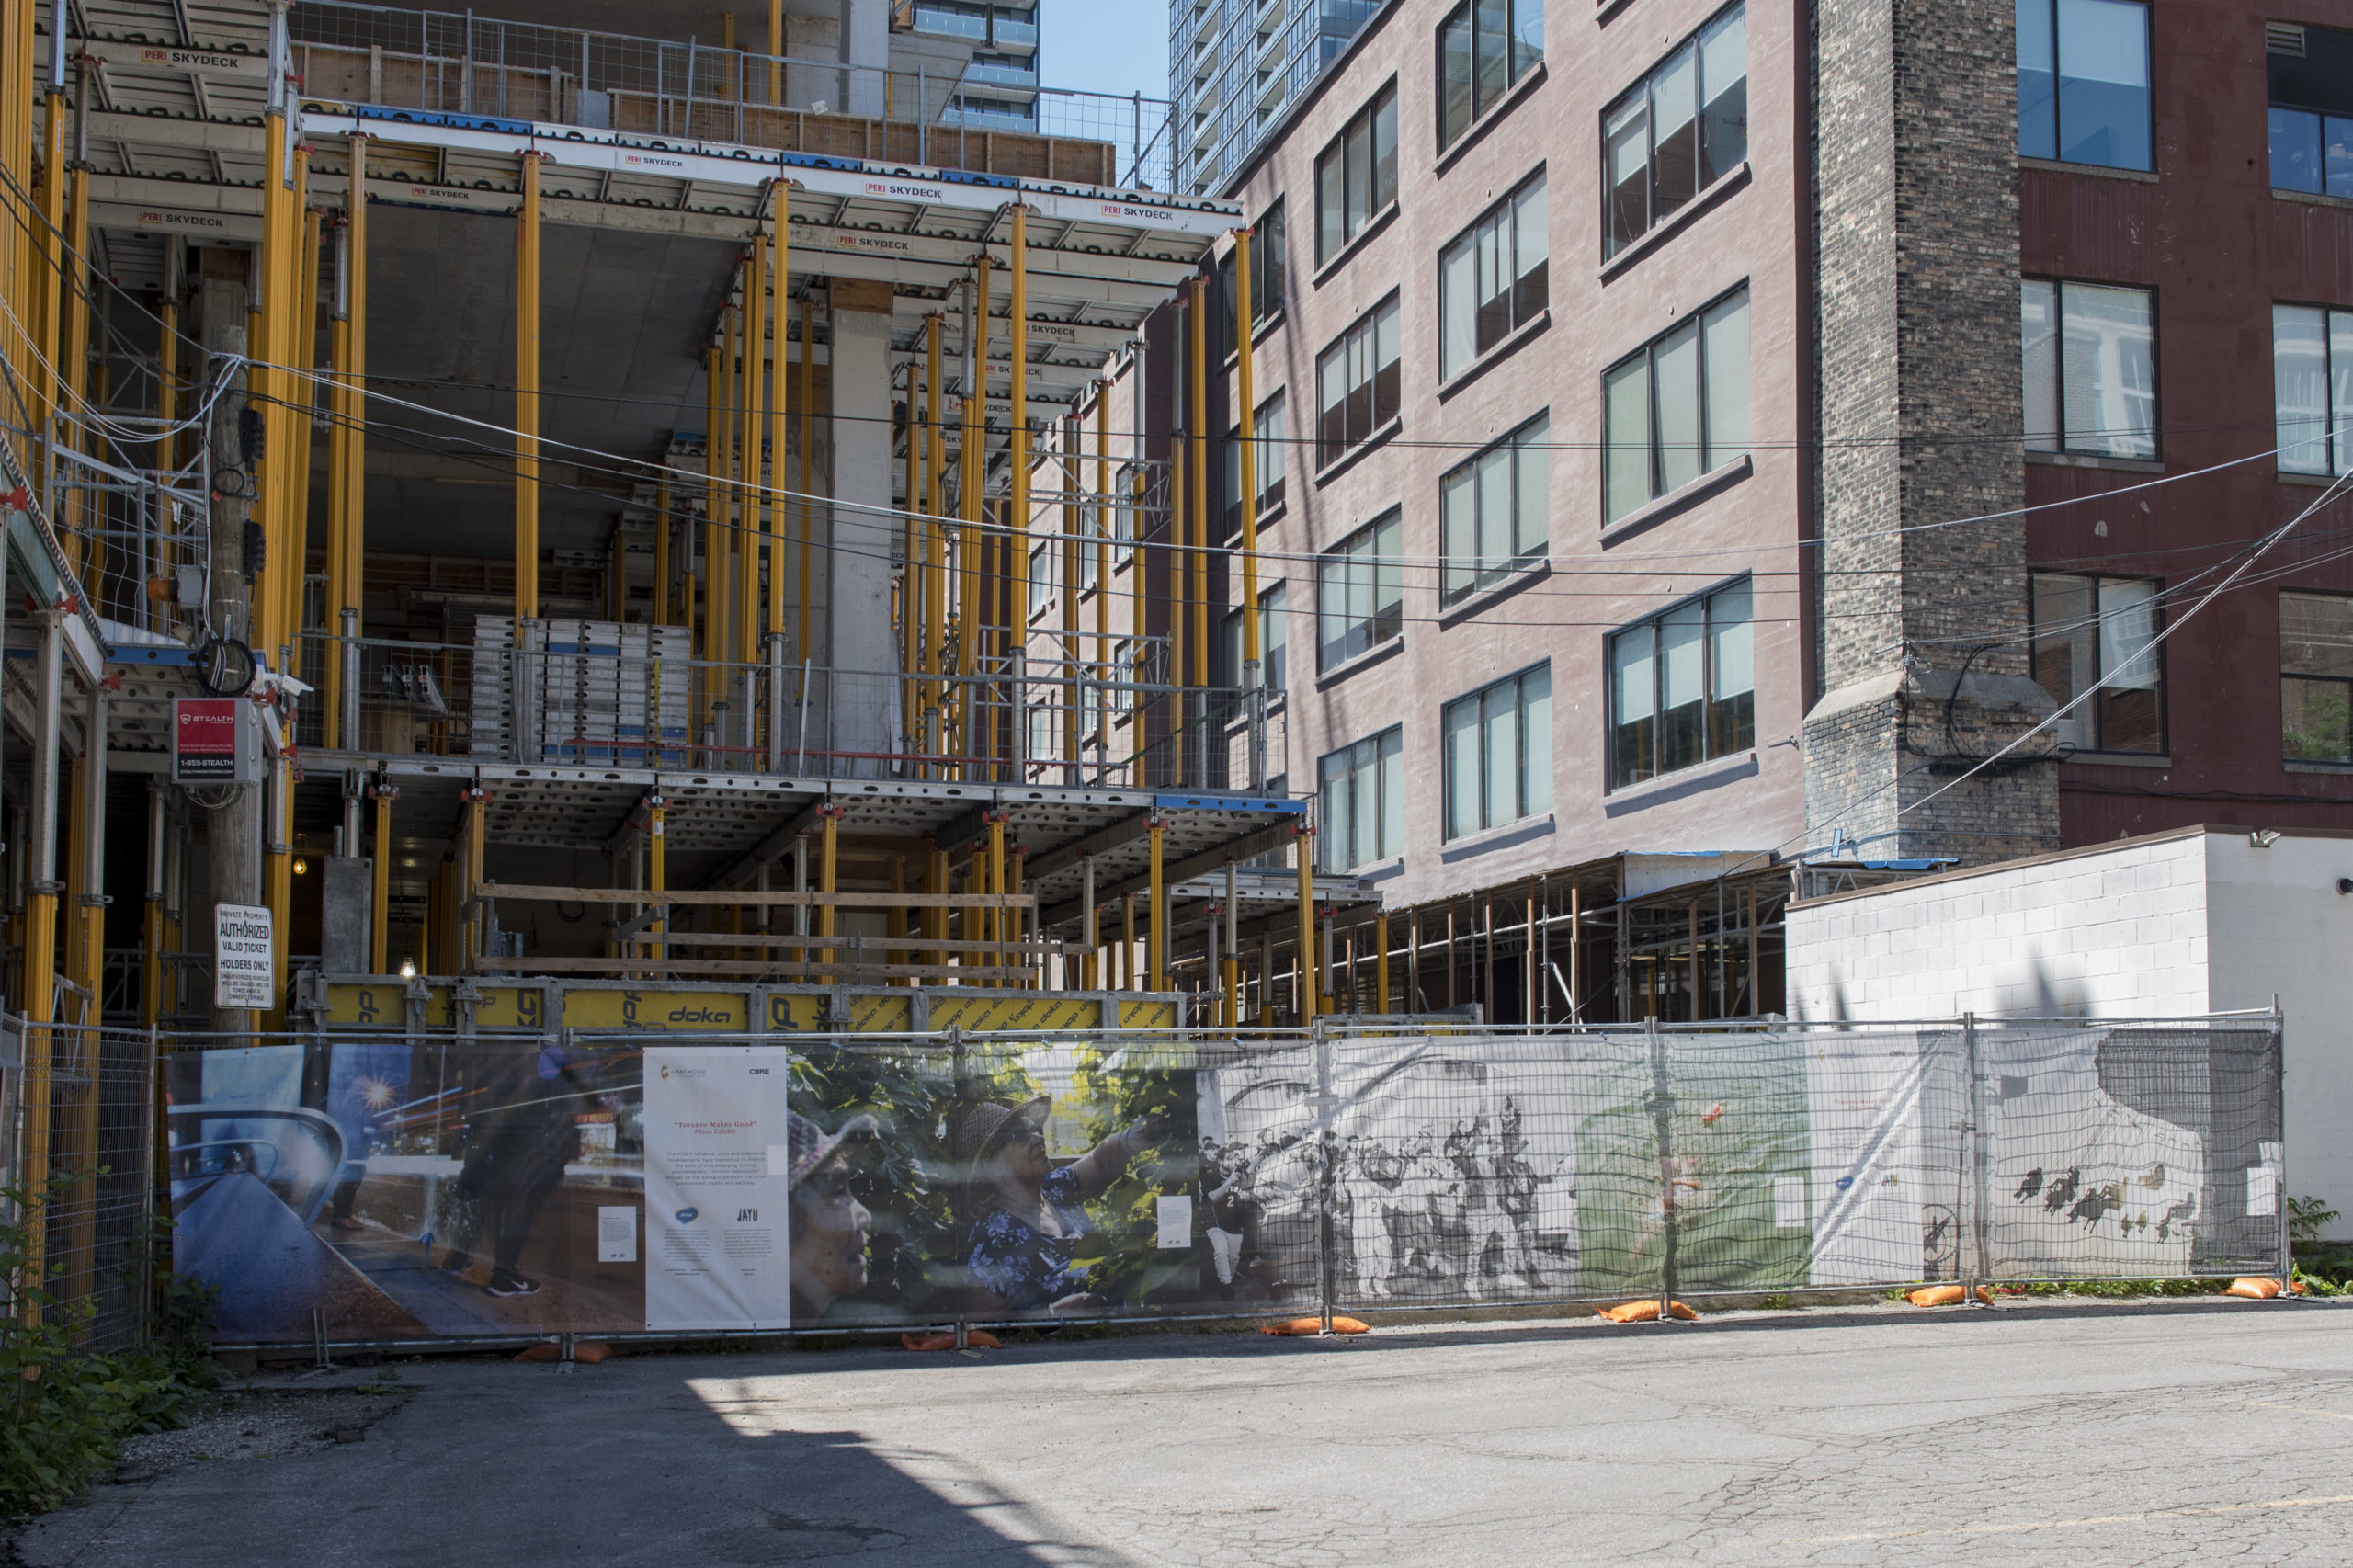 Toronto Makes Good Hoarding Exhibit with photographs on mesh fencing in a construction site